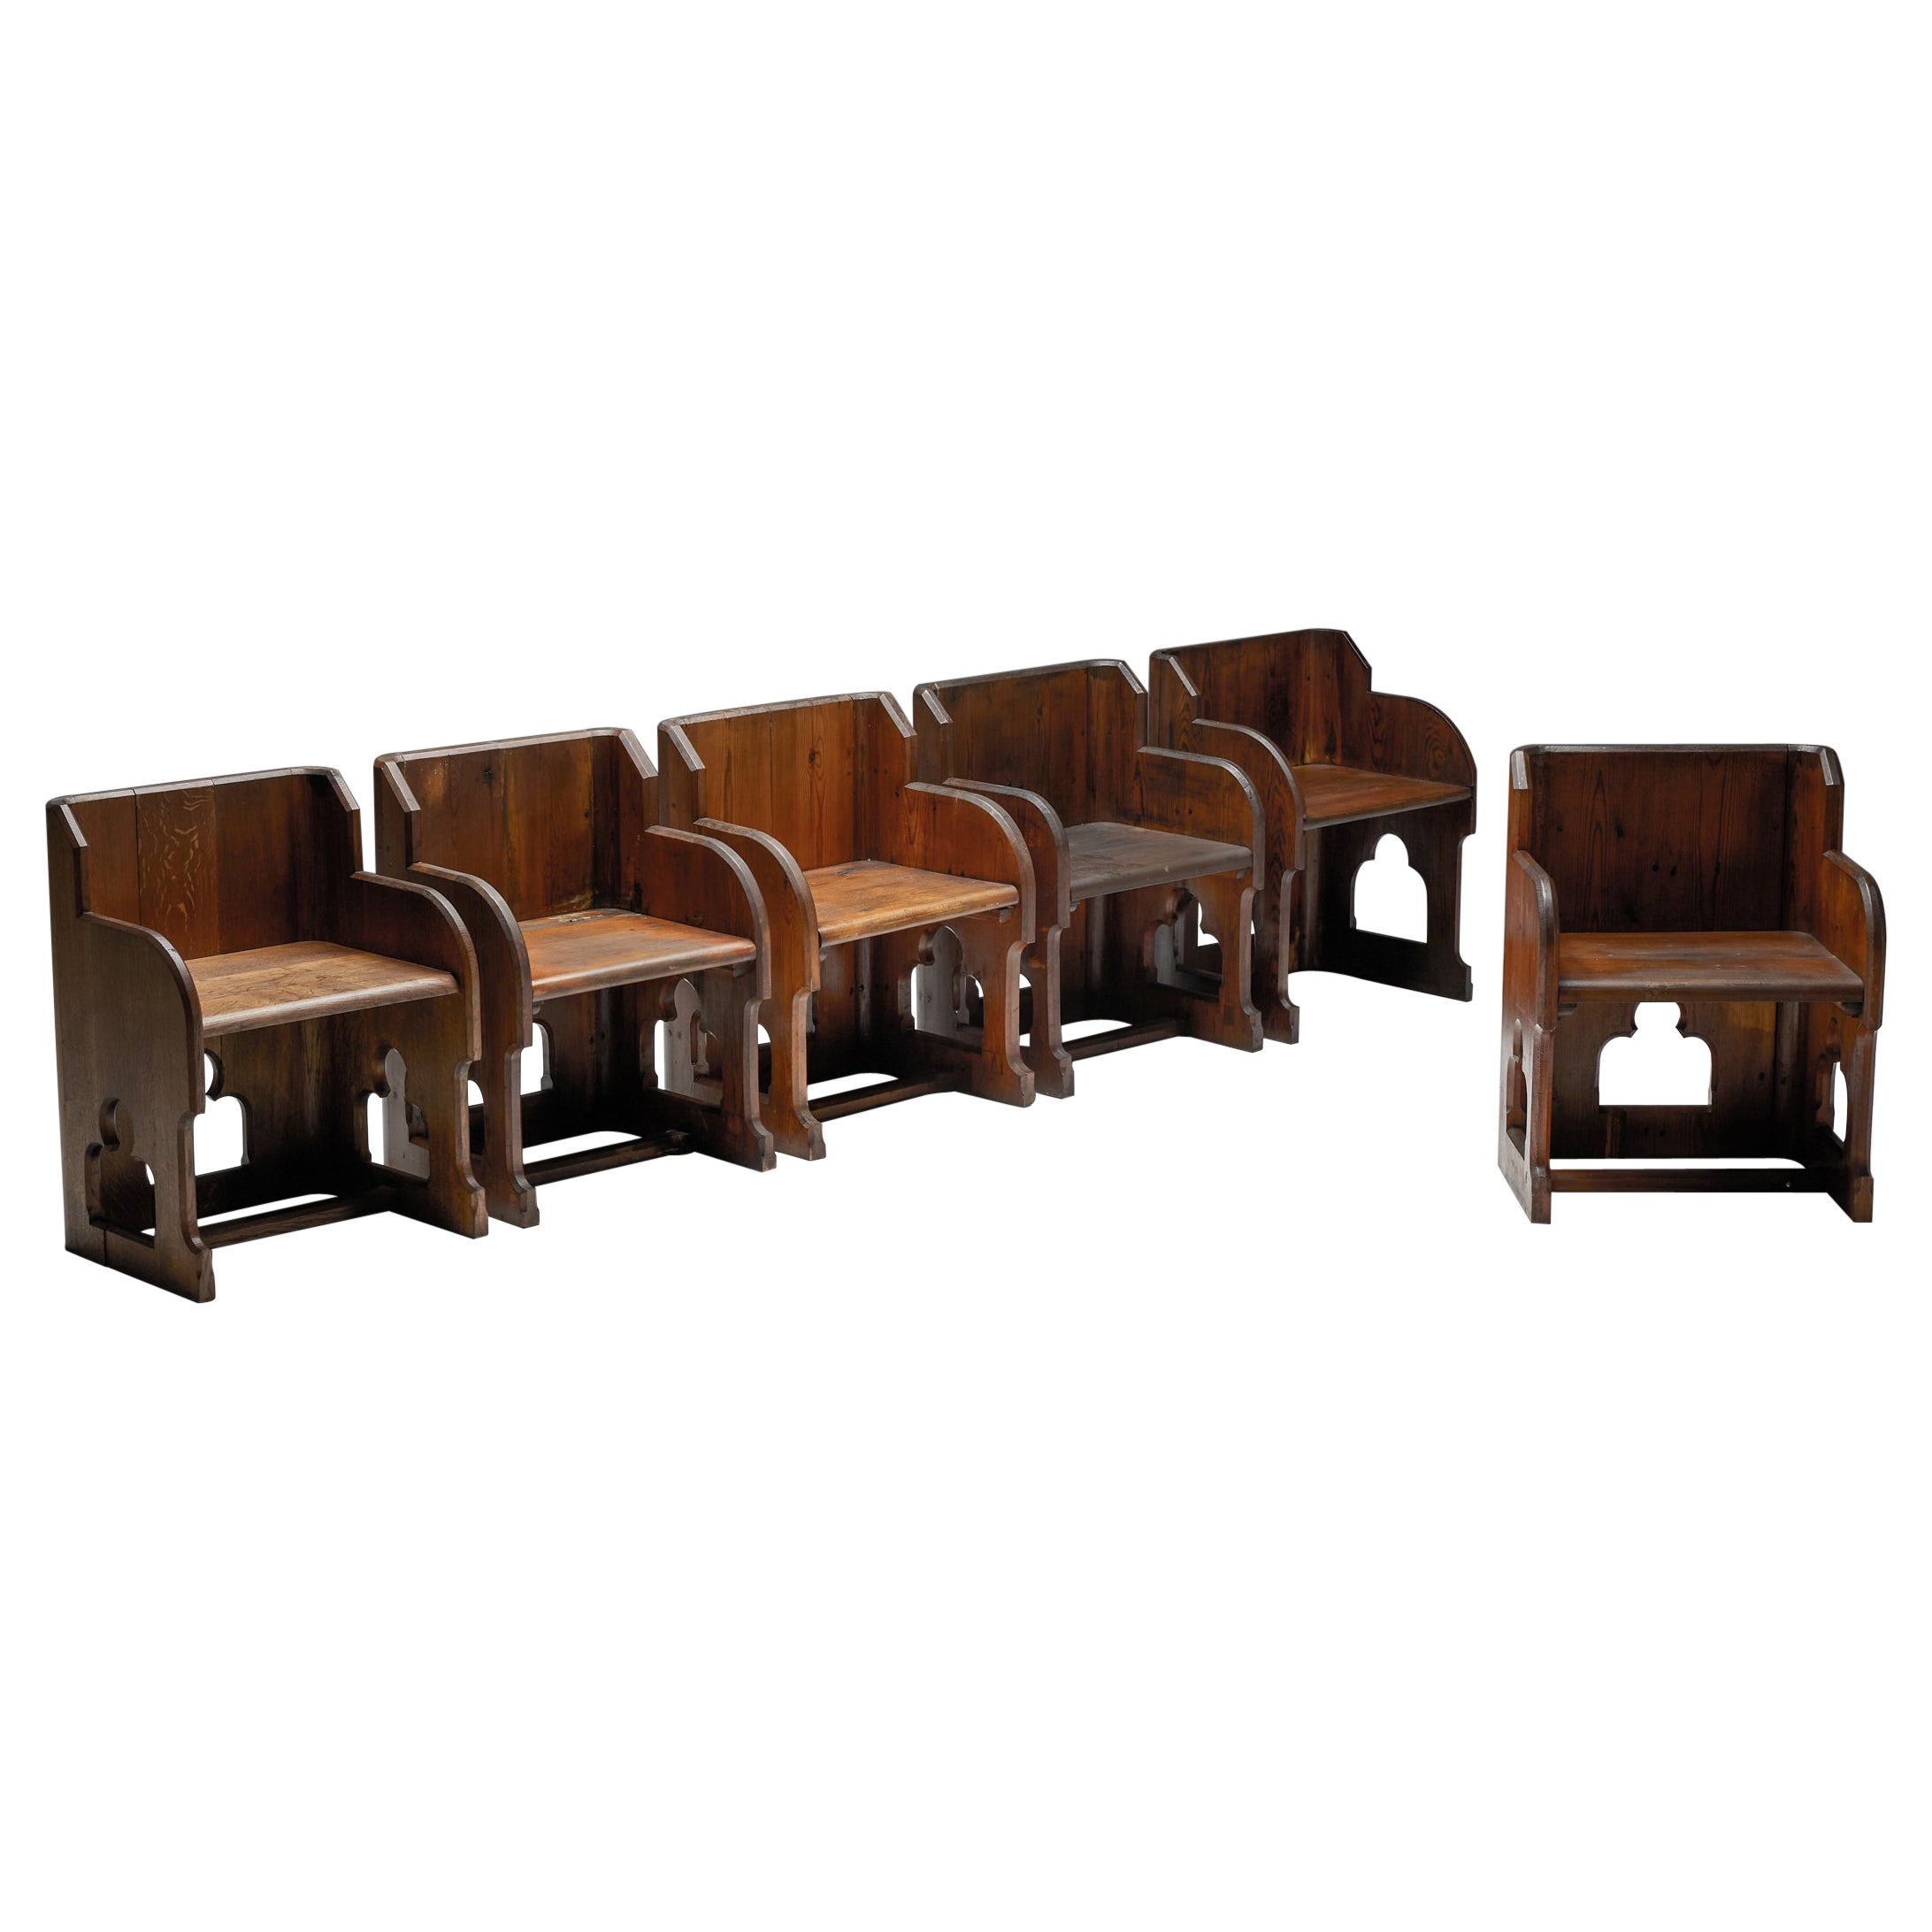 Gothic Revival Wooden Armchairs, Pine & Oak, 20th Century